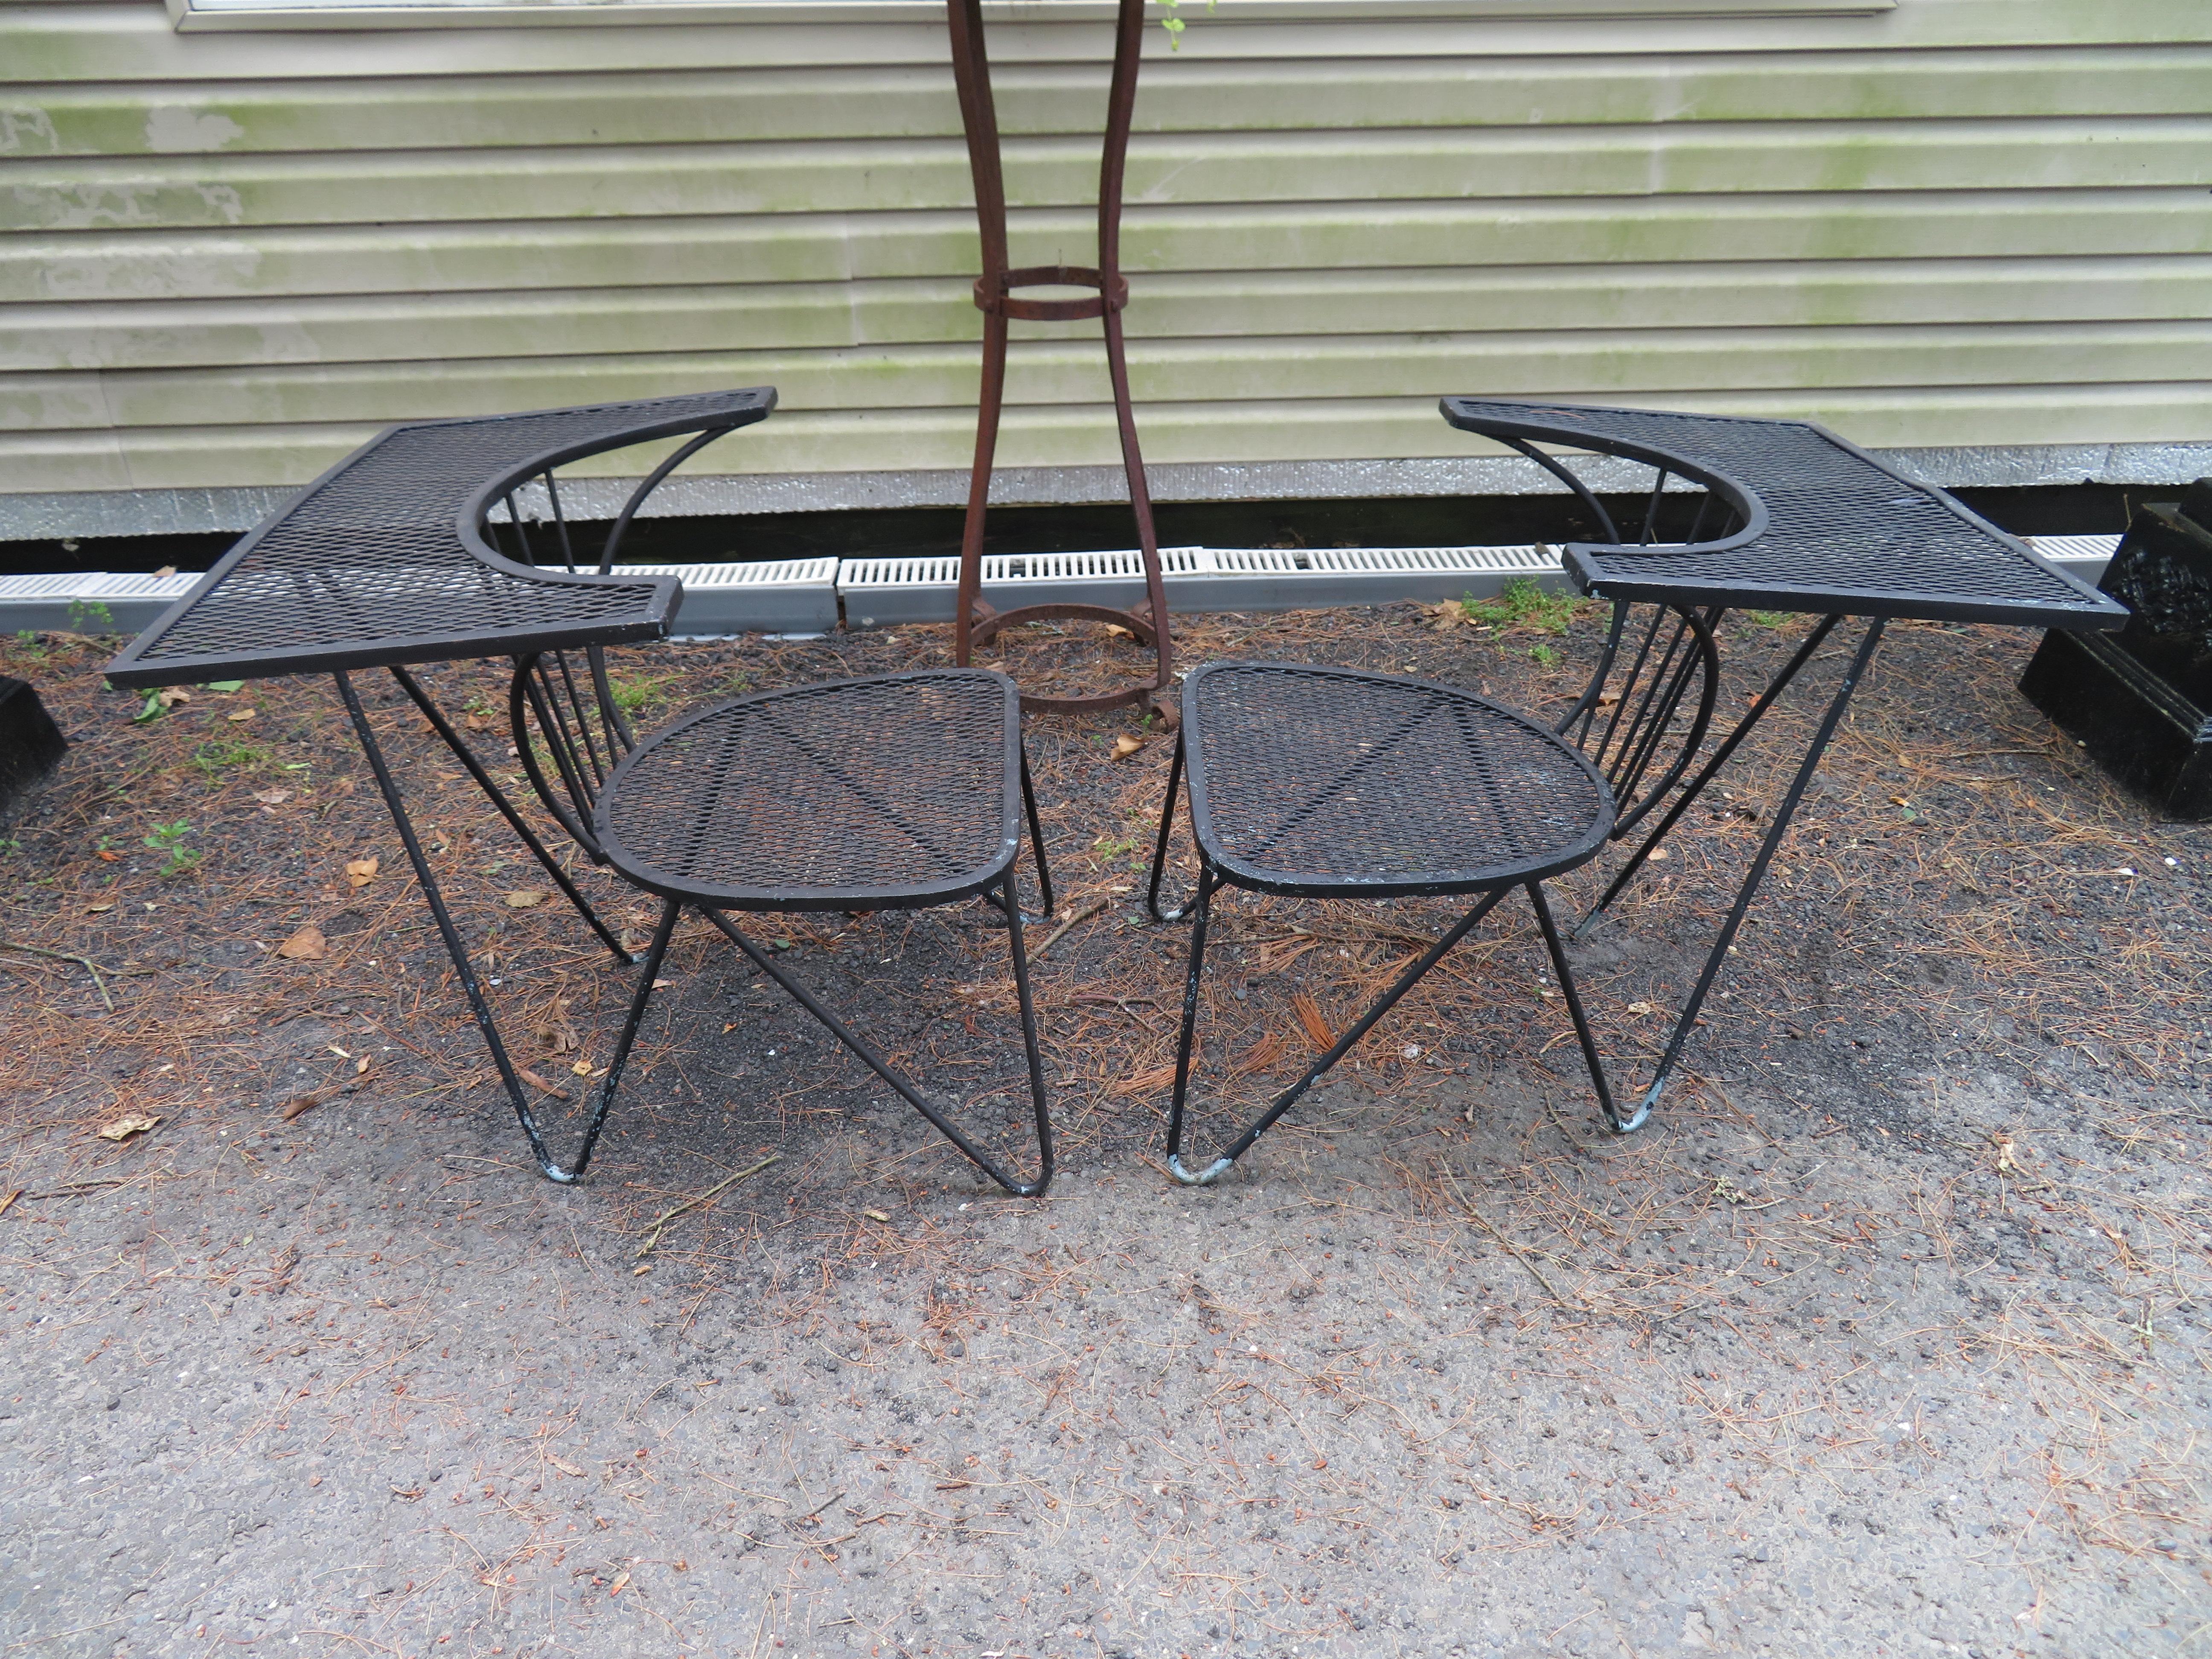 Unusual set of 4 geometric Salterini patio chairs with fabulous built in table. We have never seen another set of these so they must be quite rare. We just love the very unusual hairpin legs and the fun shaped built in mesh tables.